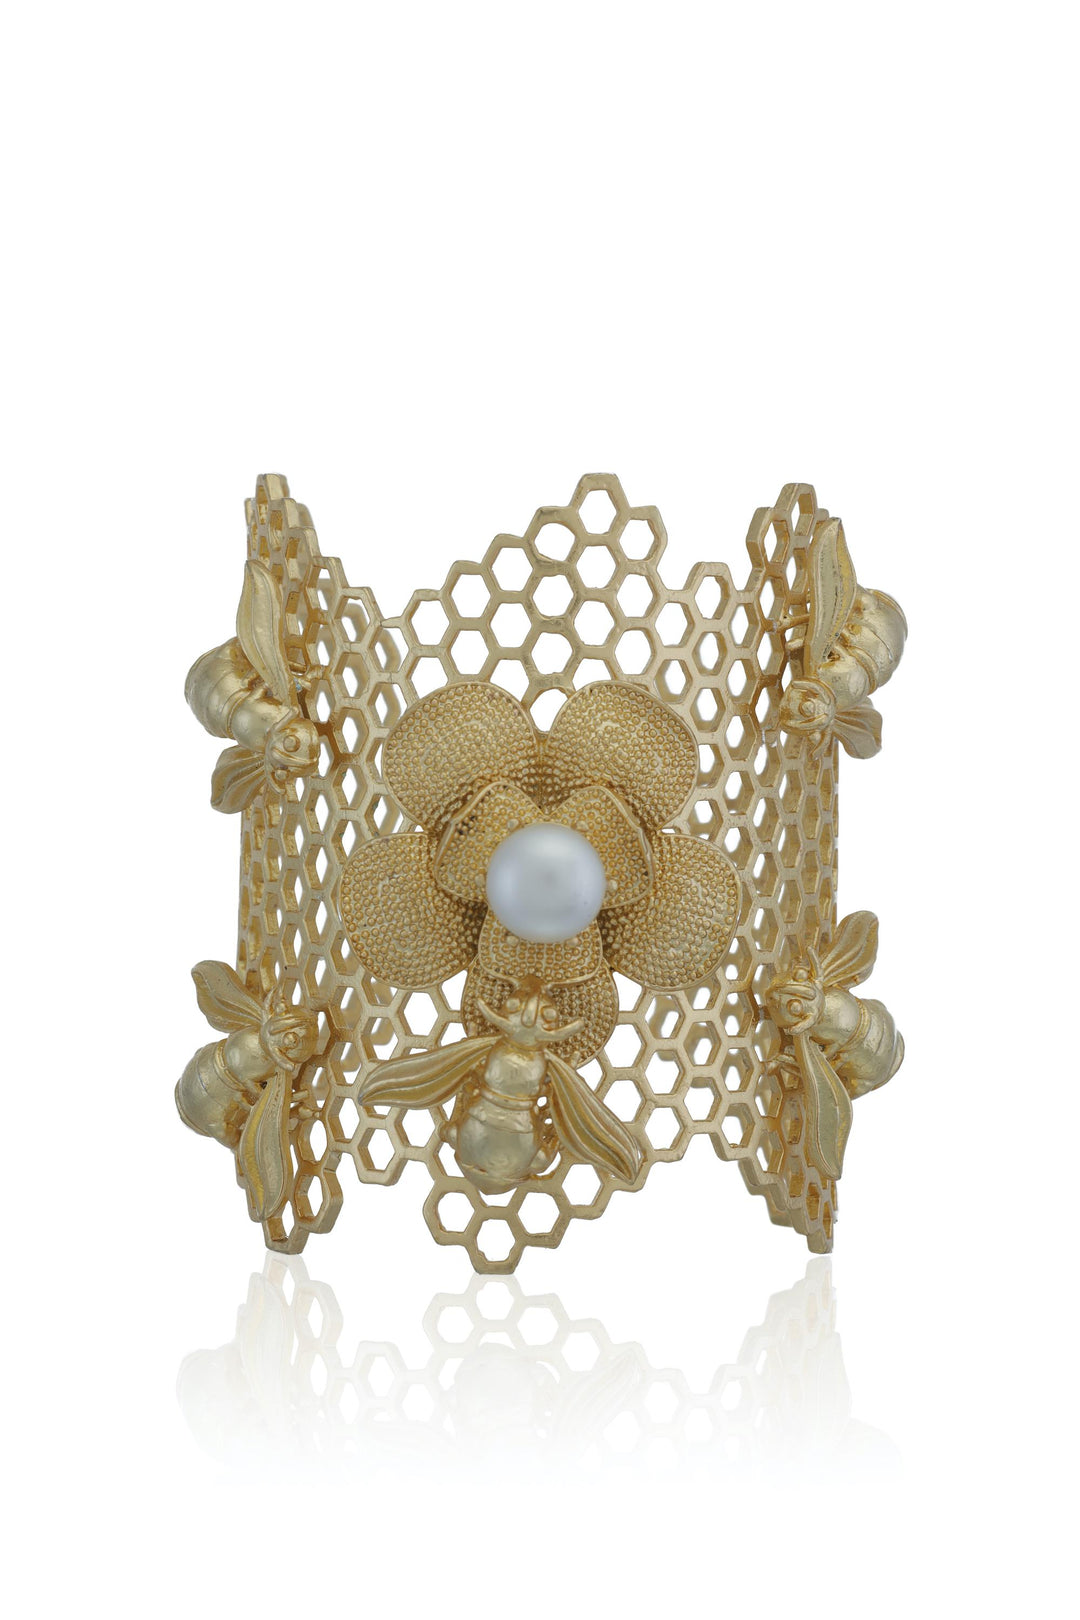 Swarm of Bees Cuff